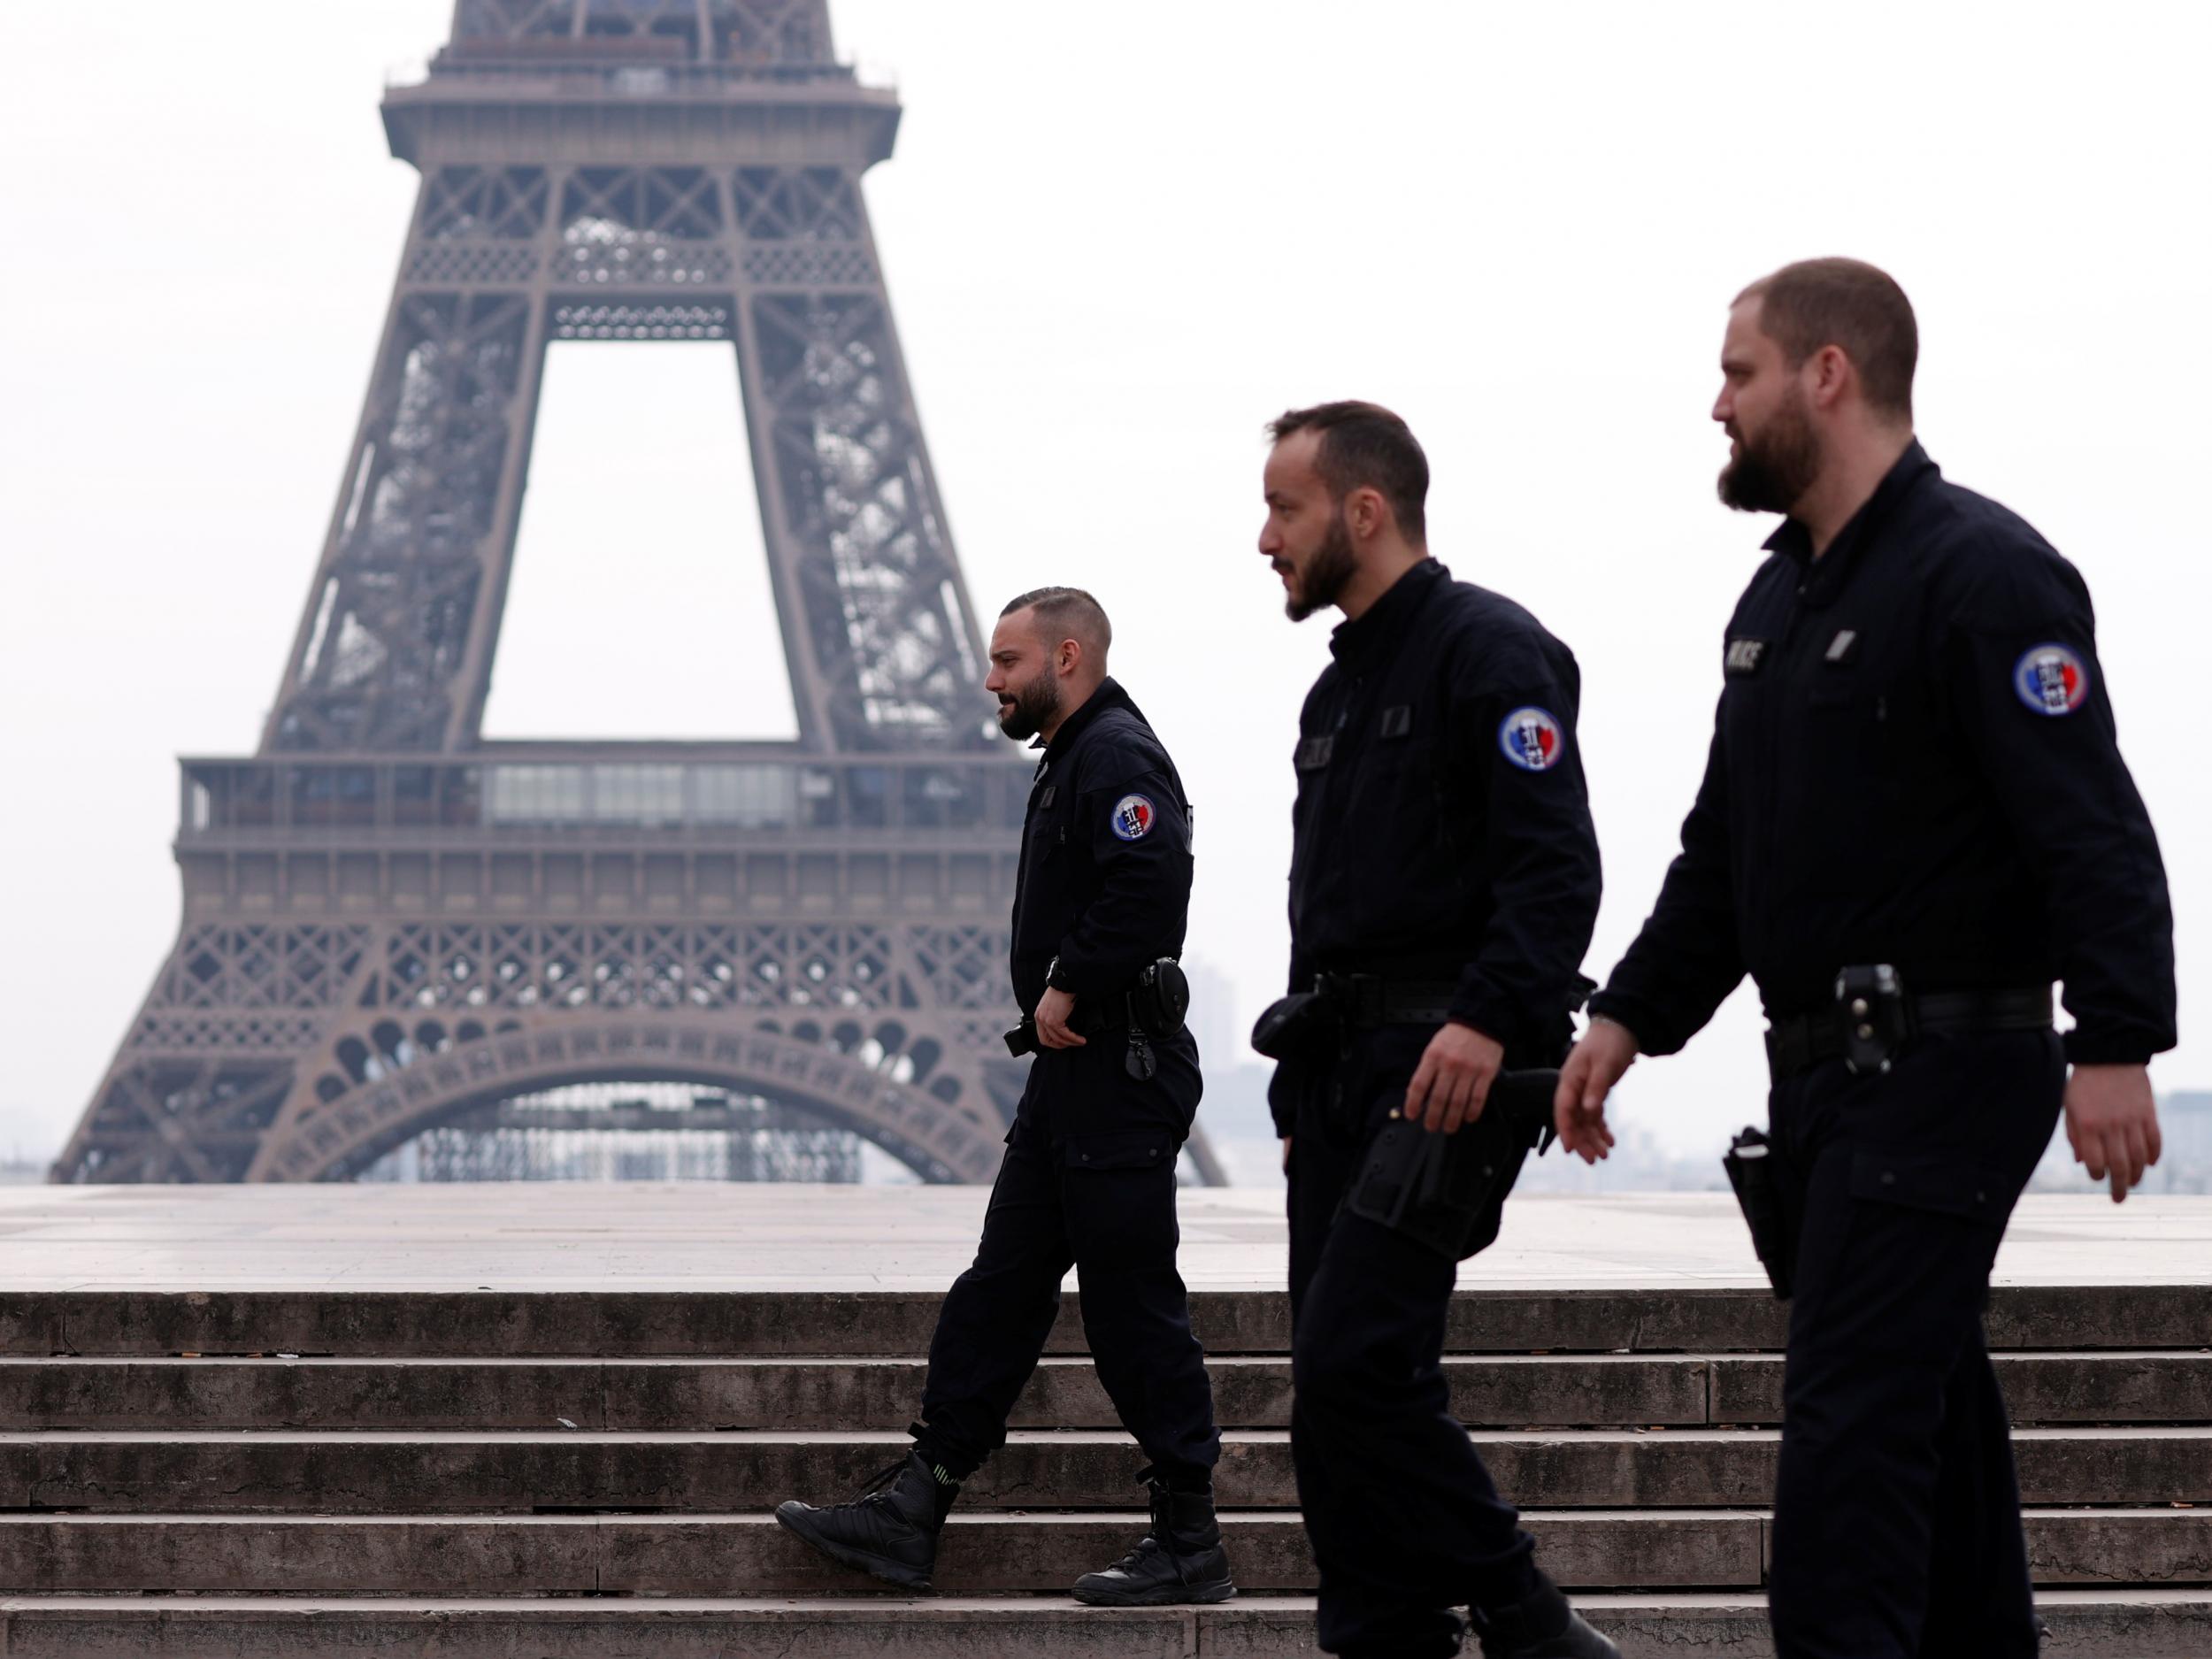 Police Force of France